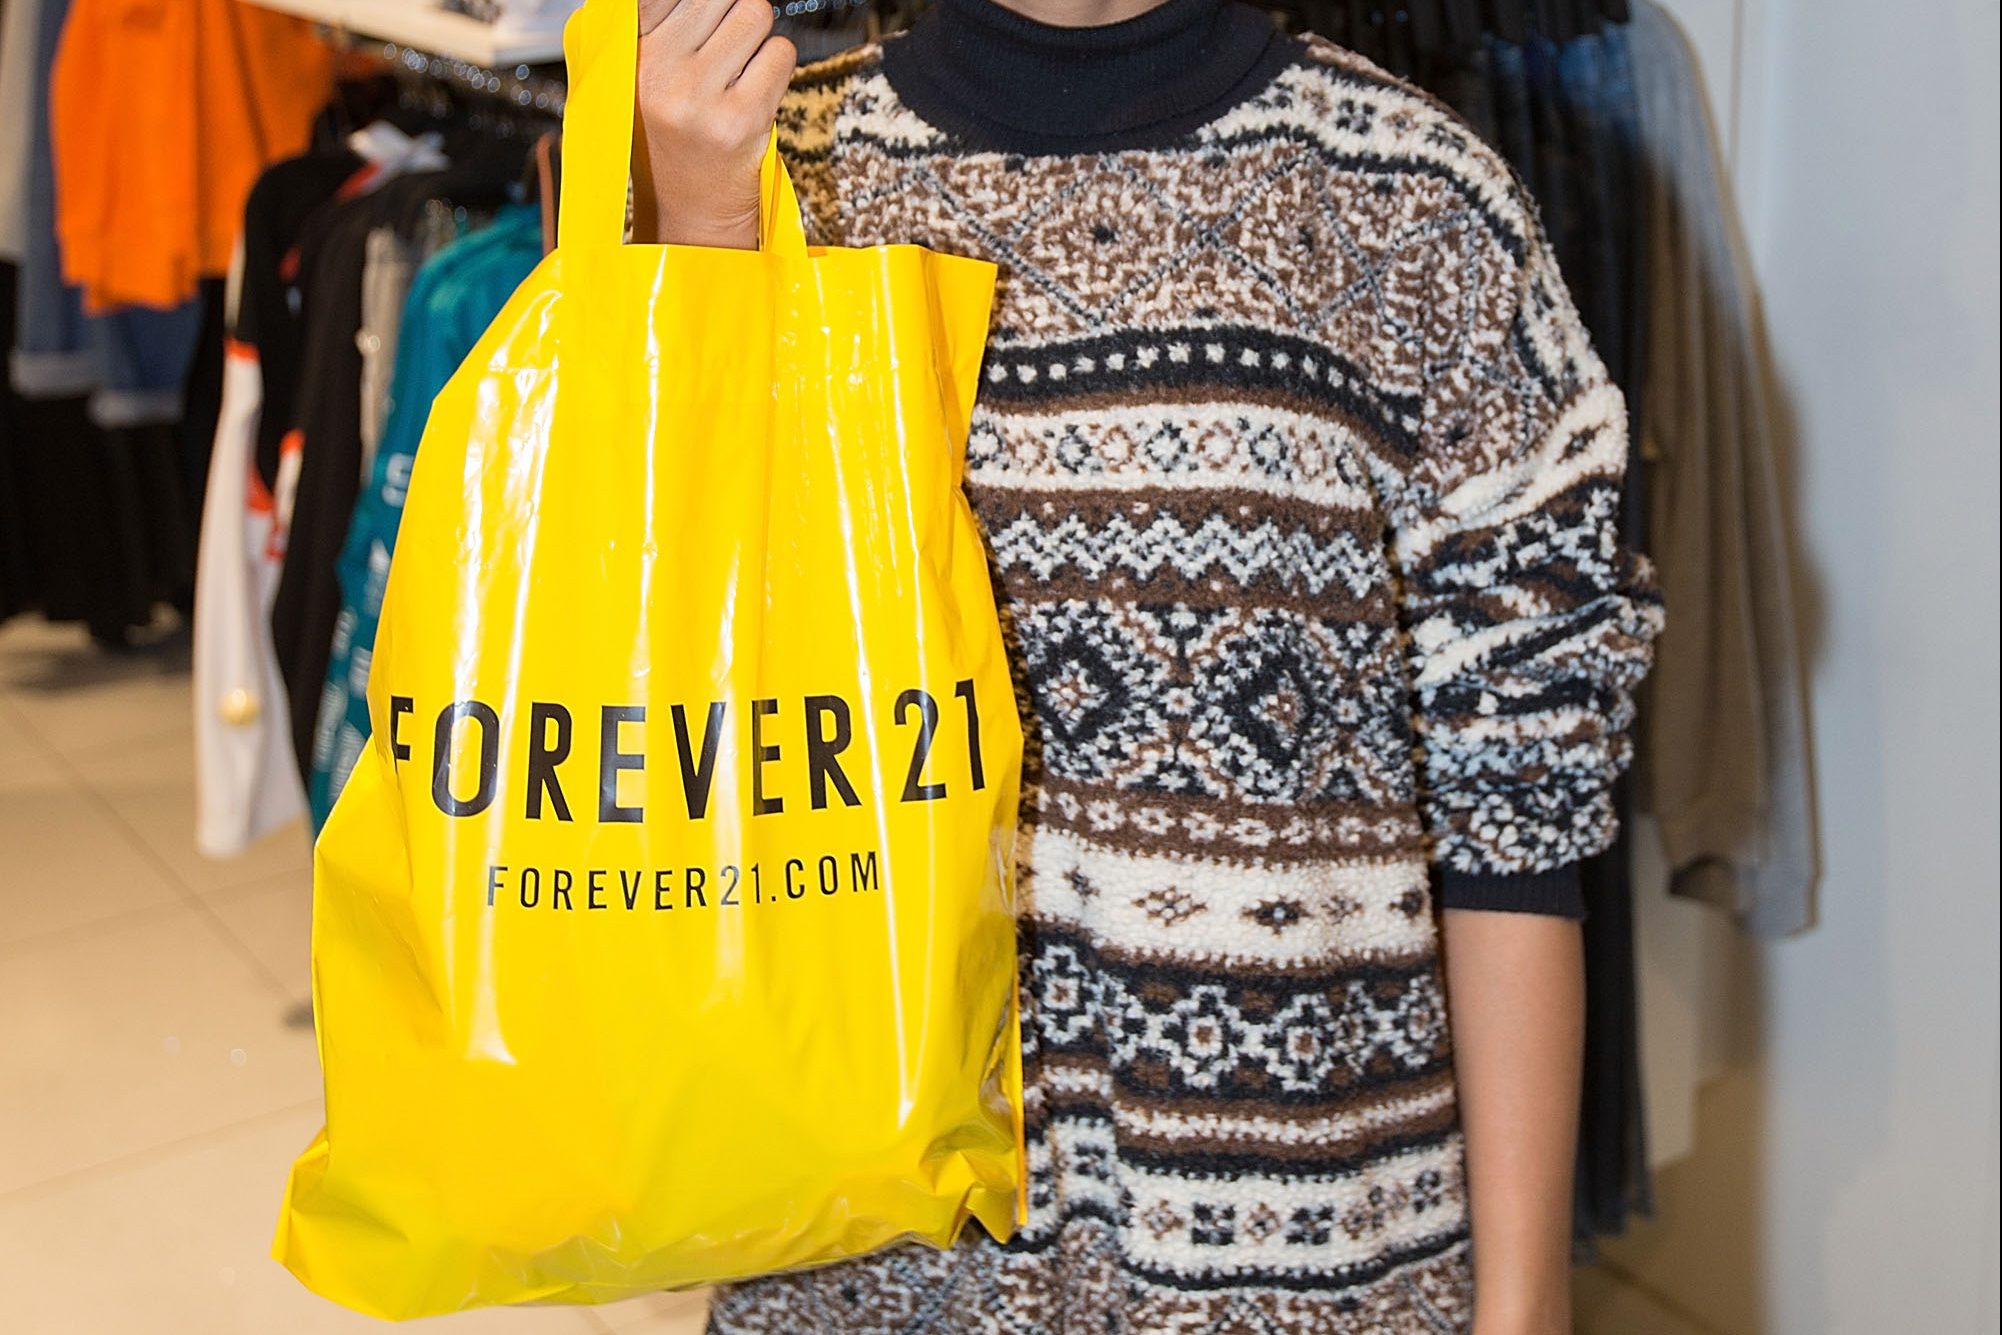 Forever 21 is closing its doors in Canada: Here's what you need to know -  National